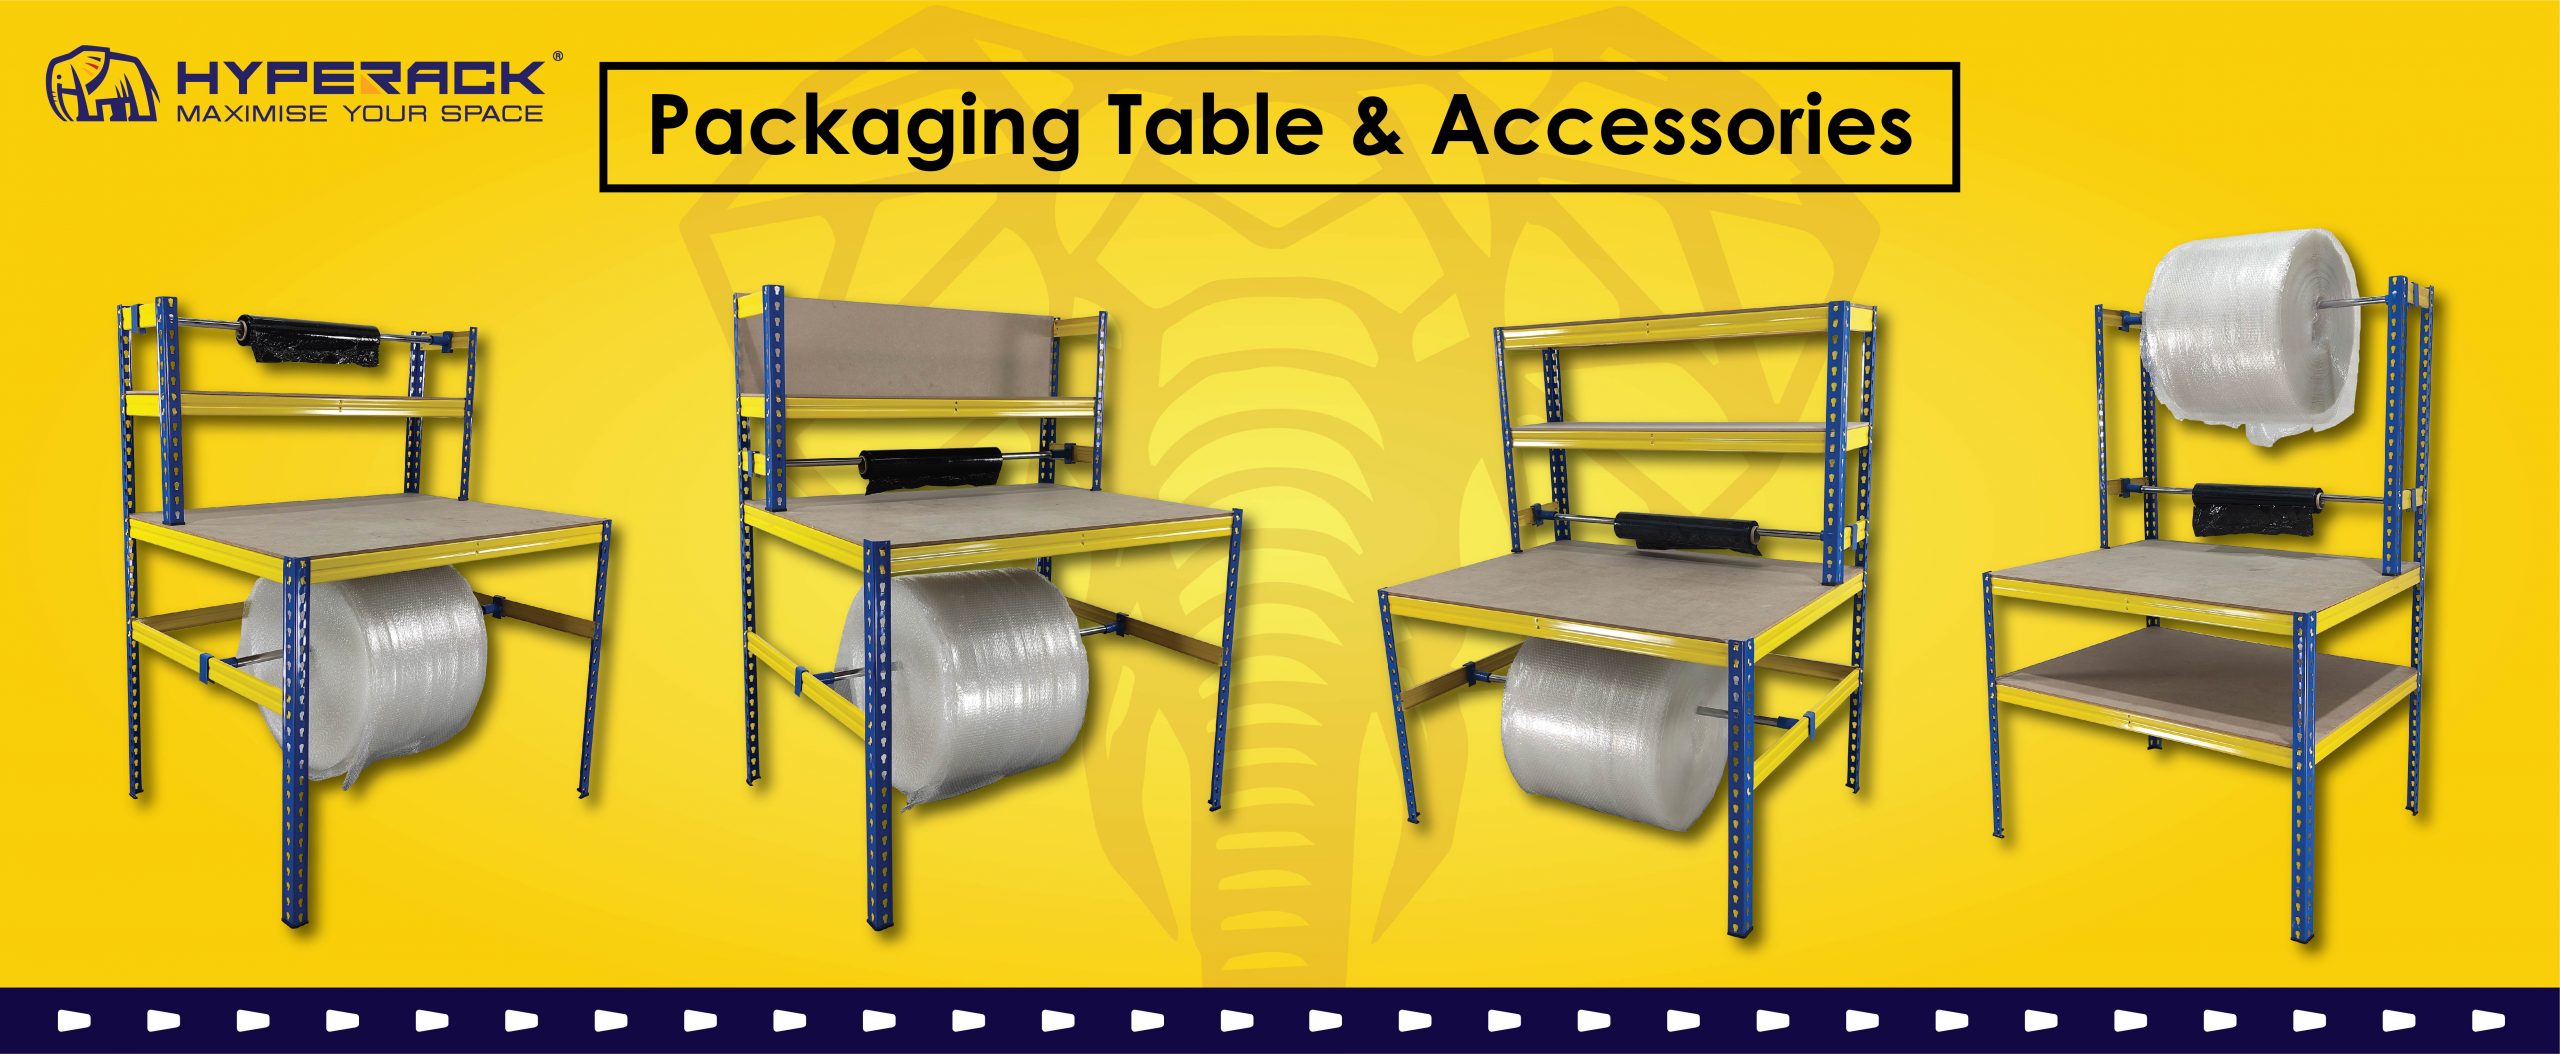  Packaging Table & Accessories 